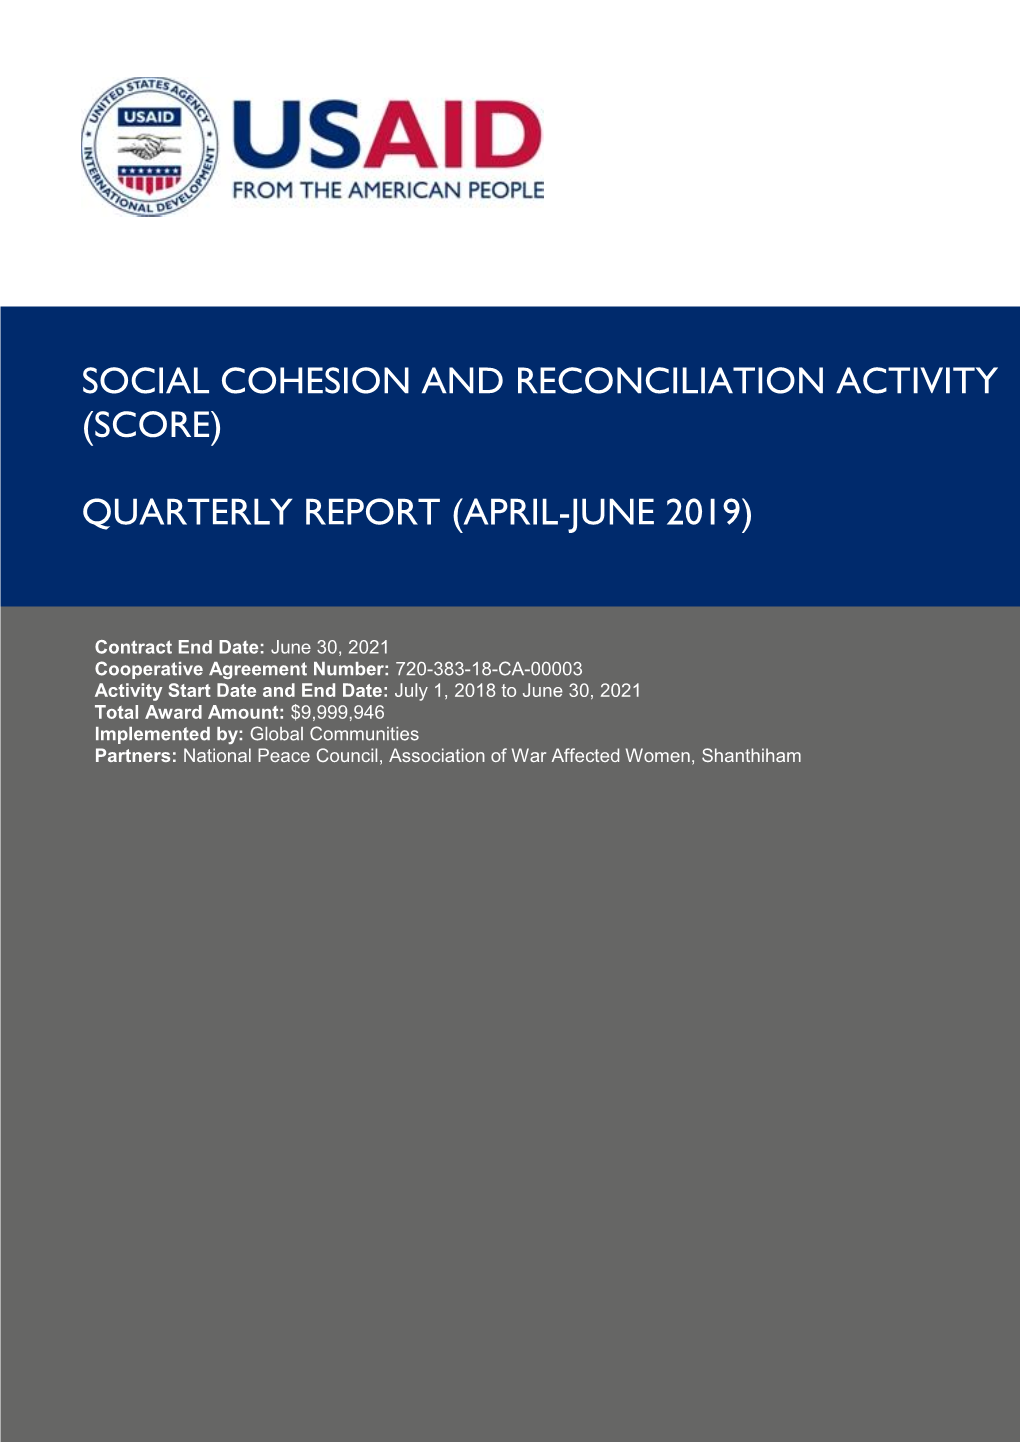 Social Cohesion and Reconciliation Activity (Score)